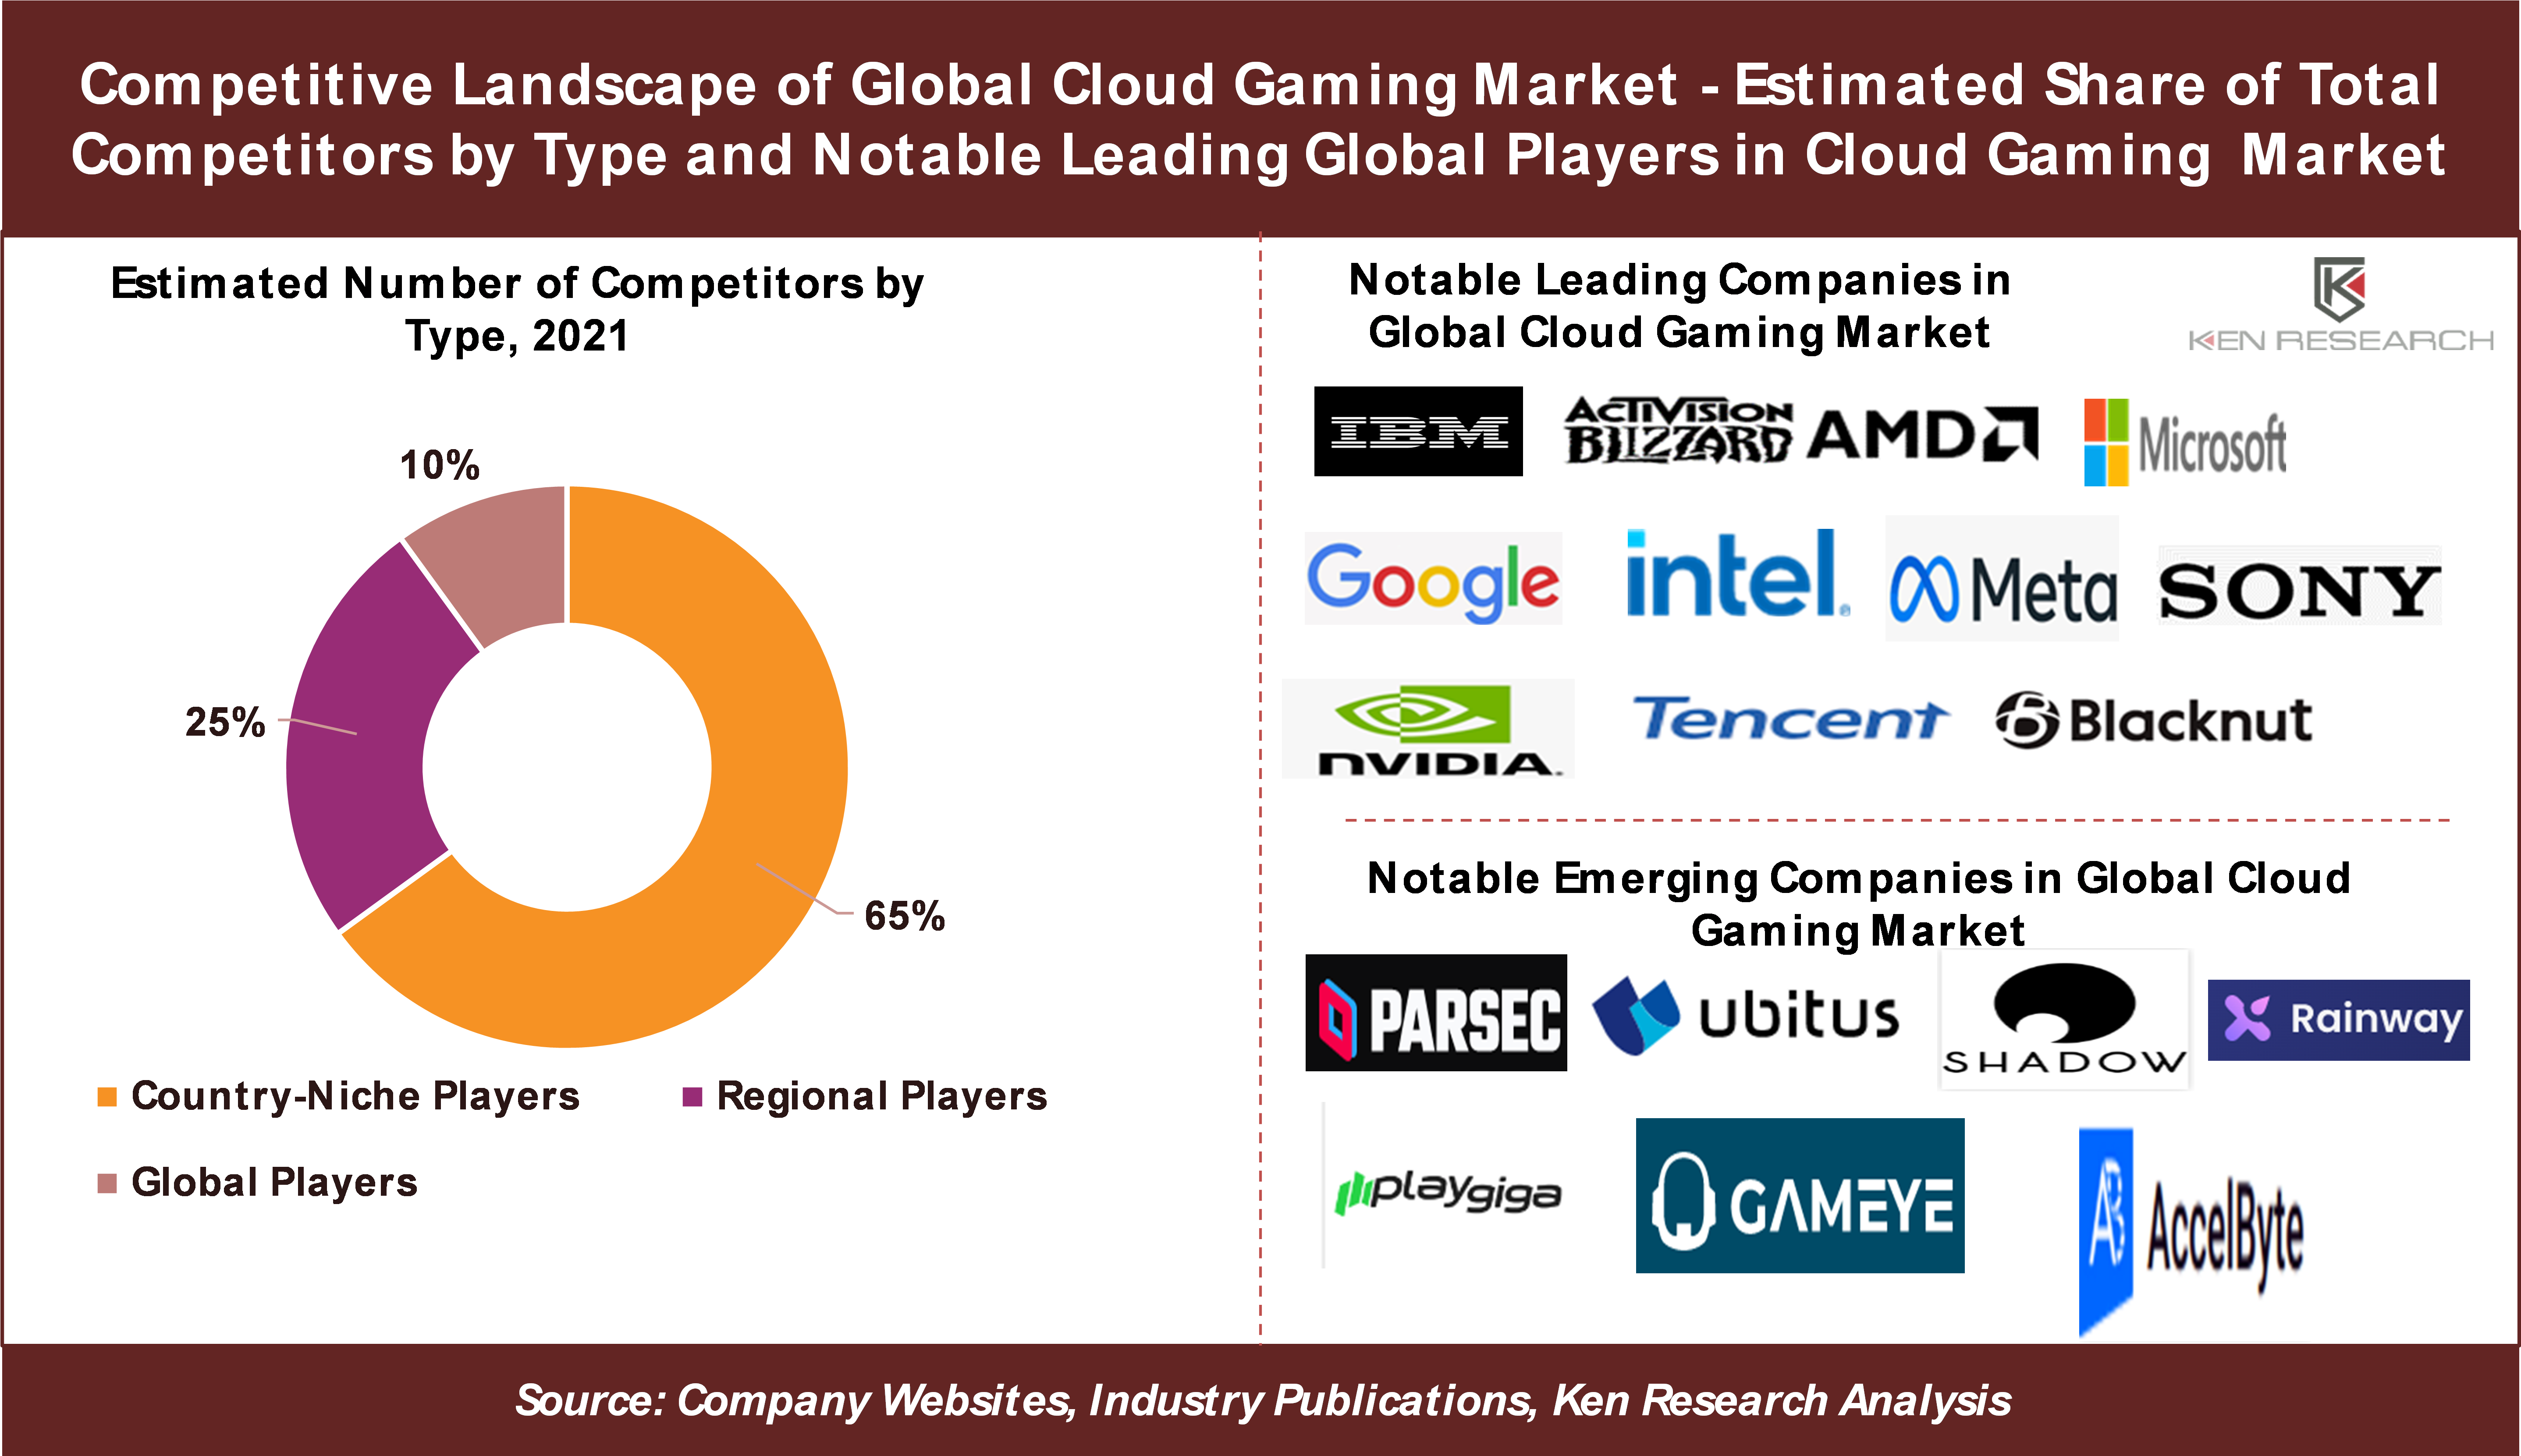 Cloud Gaming's 21.7 Million Paying Users Helped the Market